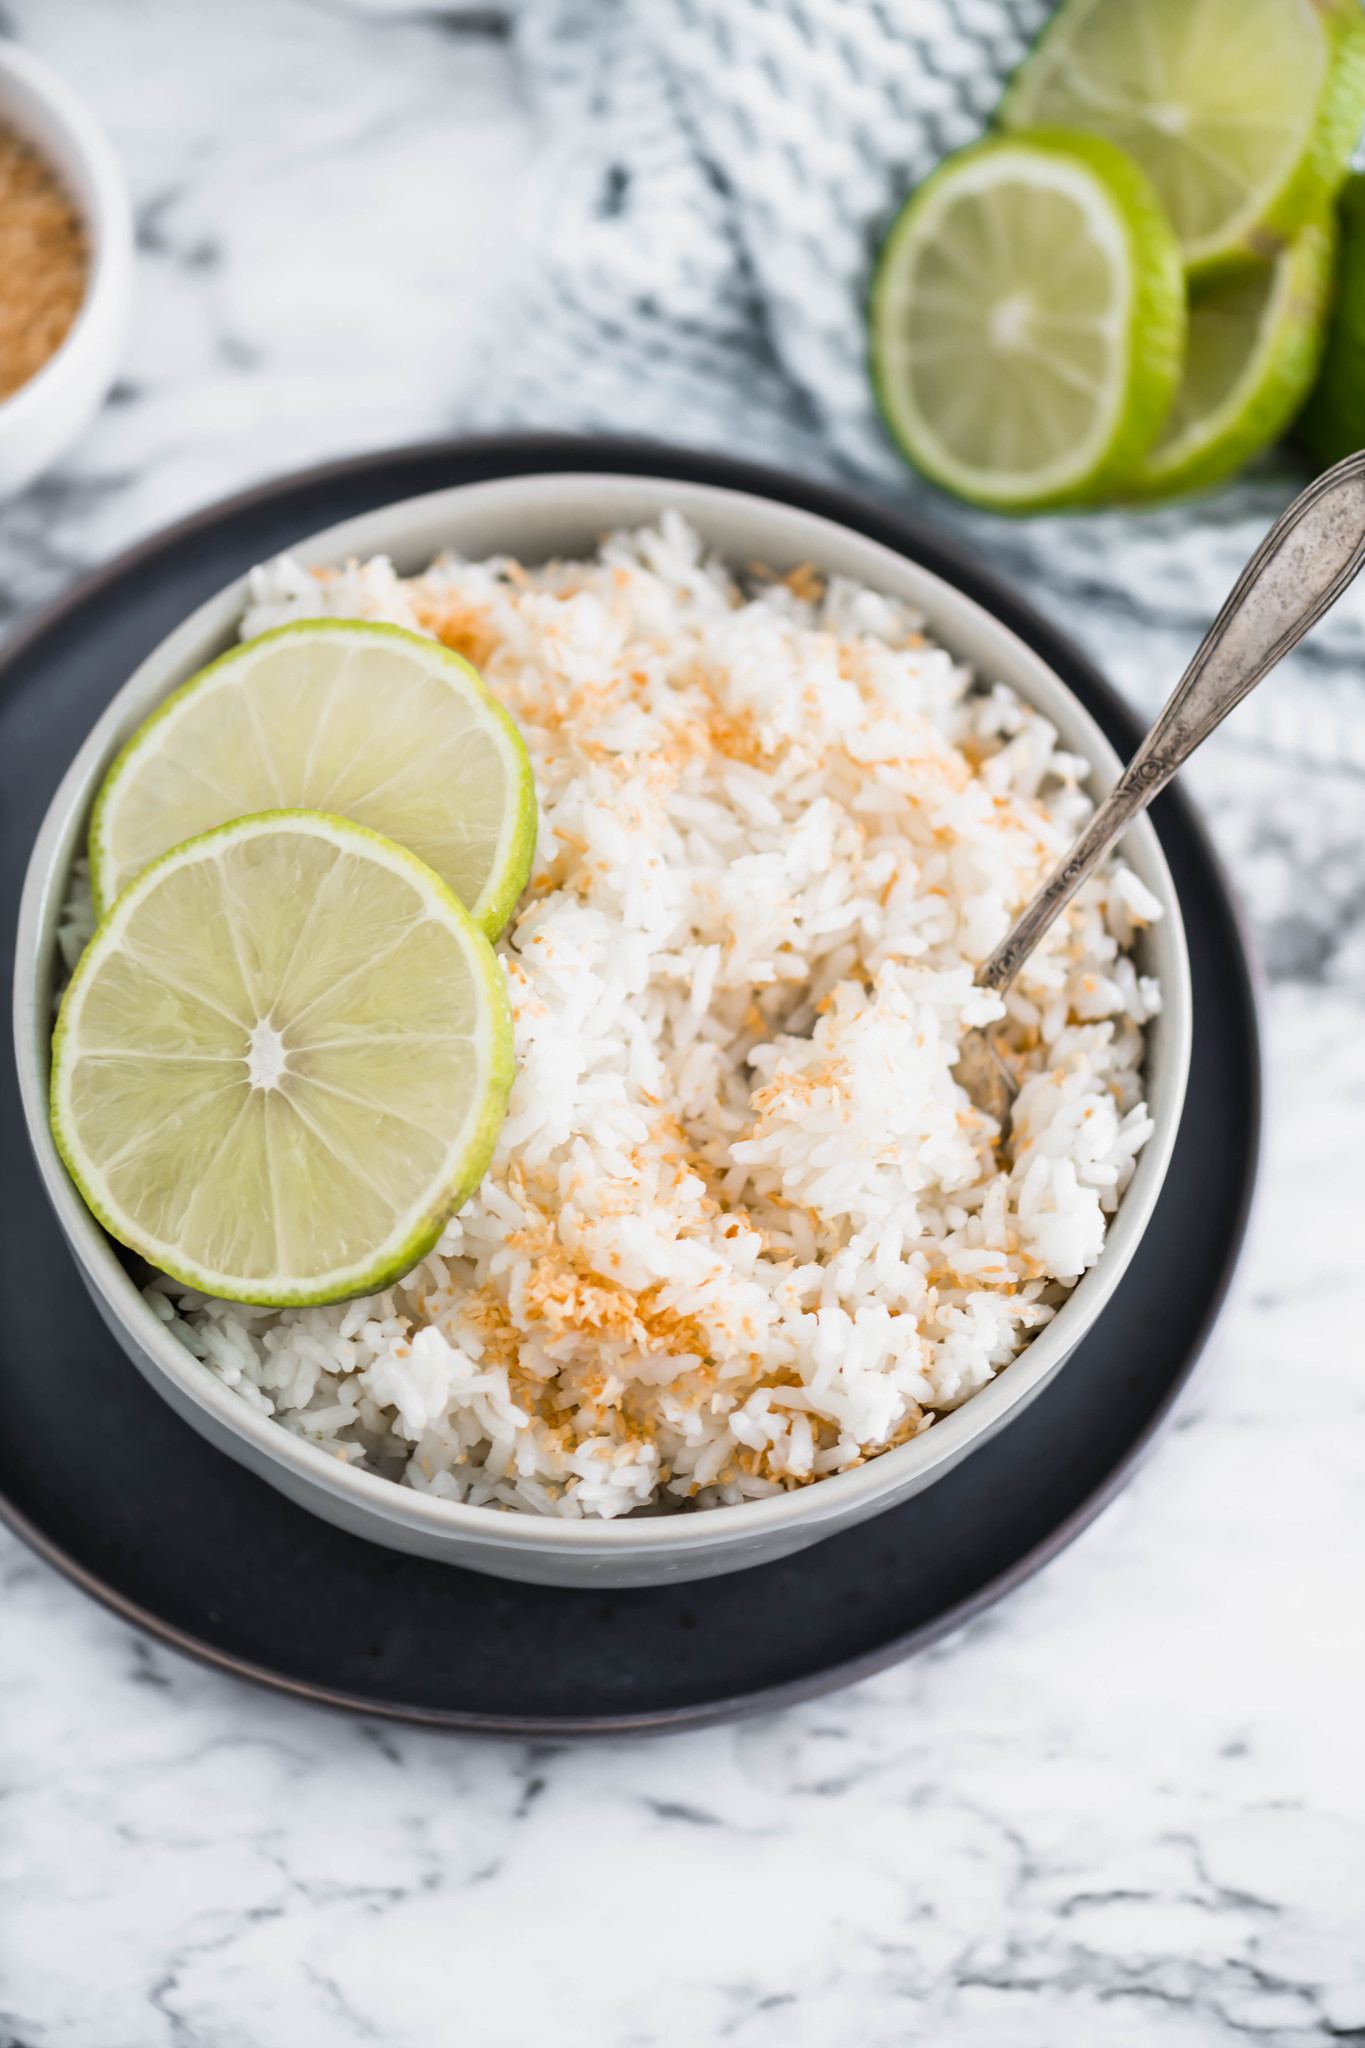 The Instant Pot obsession continues with this Instant Pot Coconut Lime Rice. Ridiculously easy to make and packed full of tropical flavor.